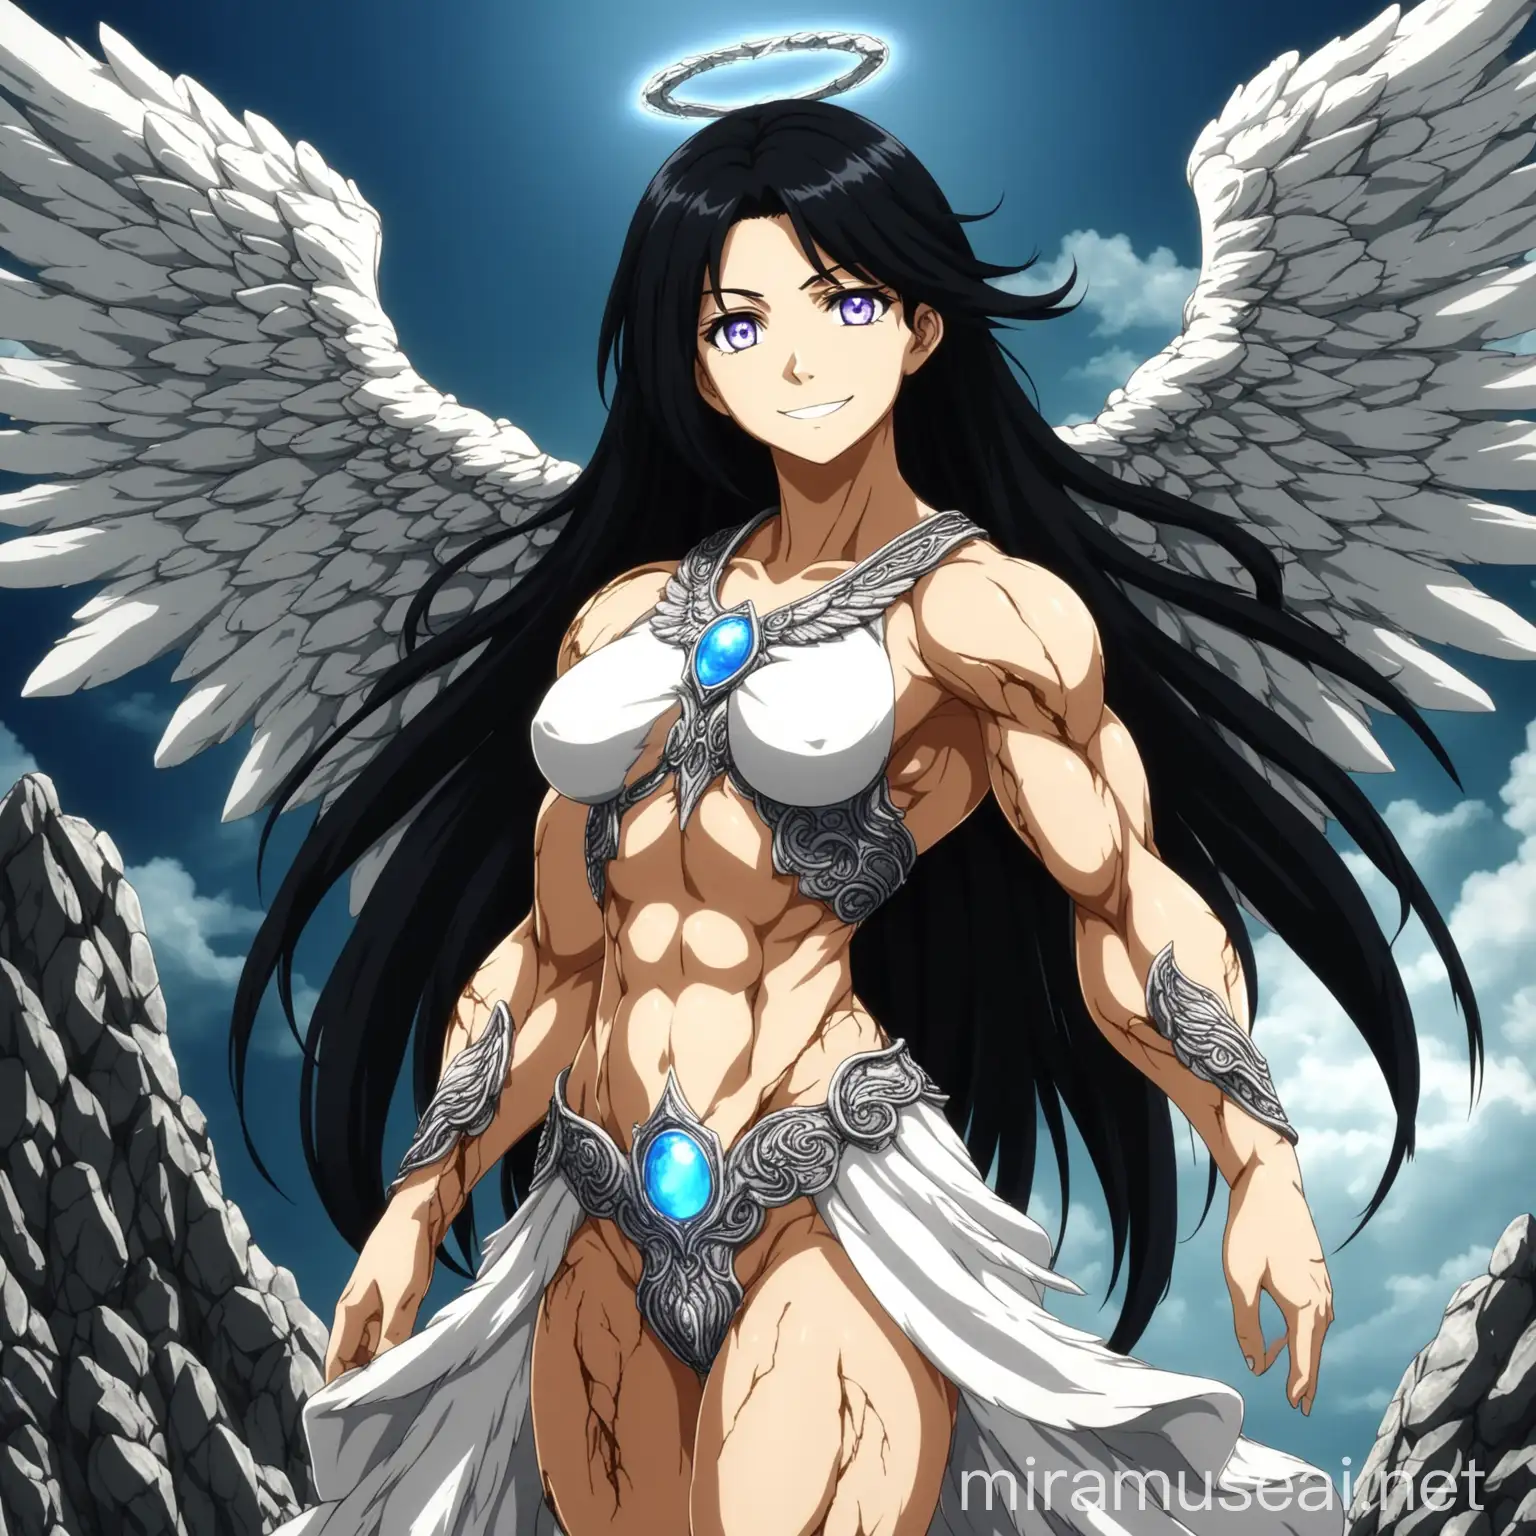 Muscular Stone Angel with Luminescent Eyes and Anime Style